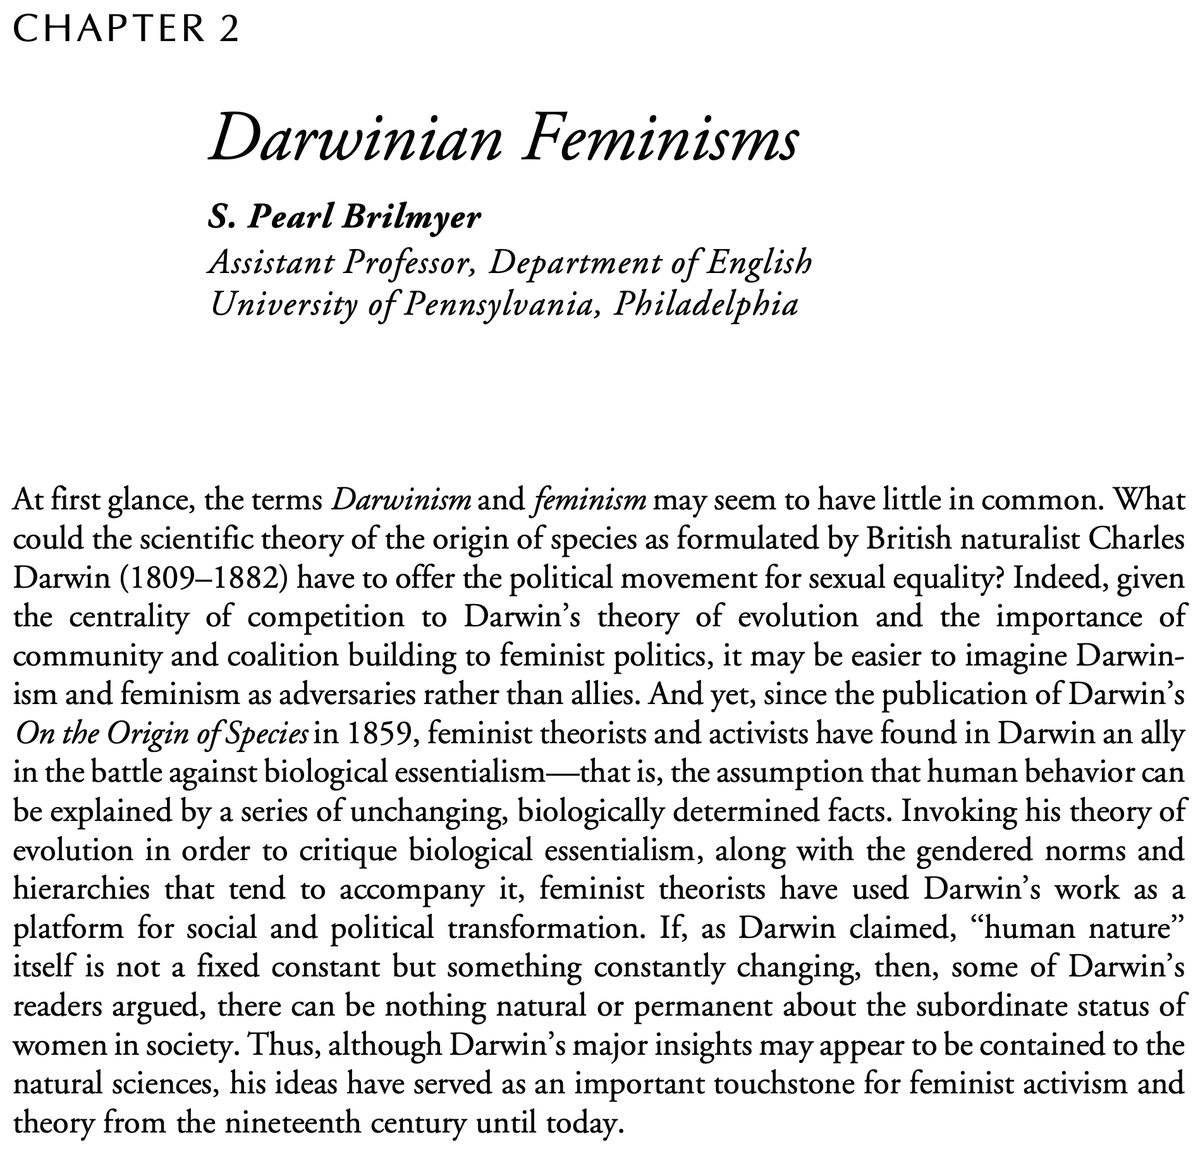 Followed up by  @professorperl's 'Darwinian Feminisms' (2017), which provides a historical overview of feminist interactions with evolutionary thinking from the publication of On the Origin of Species to today...  https://www.english.upenn.edu/sites/www.english.upenn.edu/files/articles/Brilmyer_2017_Darwinian%20Feminisms.PDF